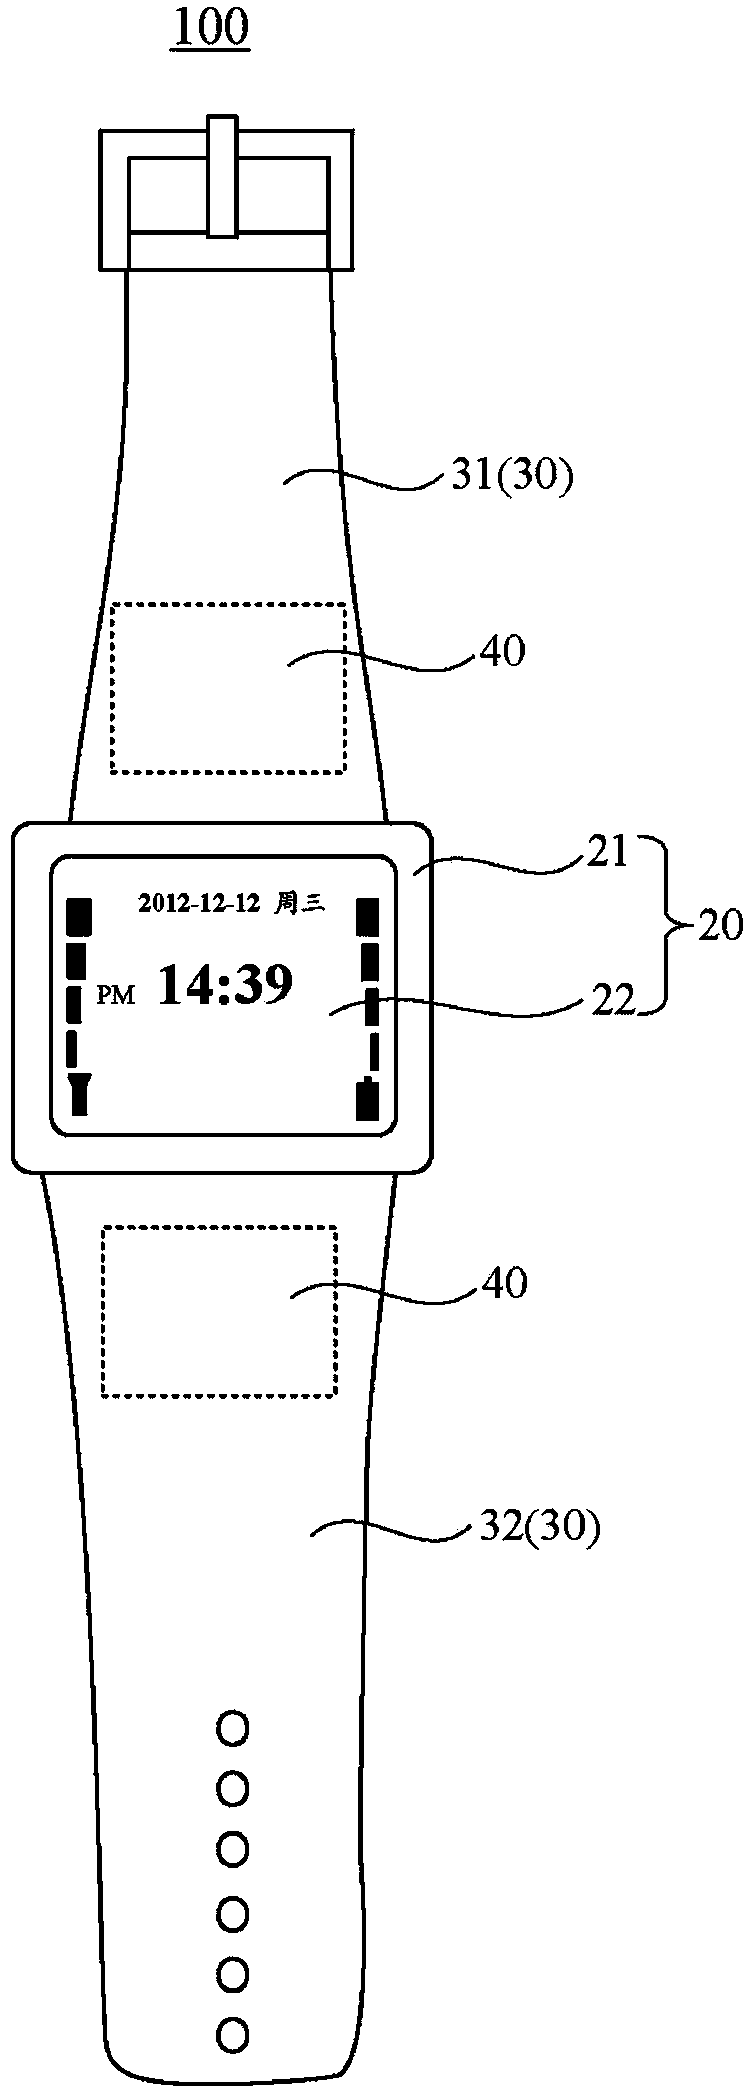 Portable electronic device capable of extending near field communication distance